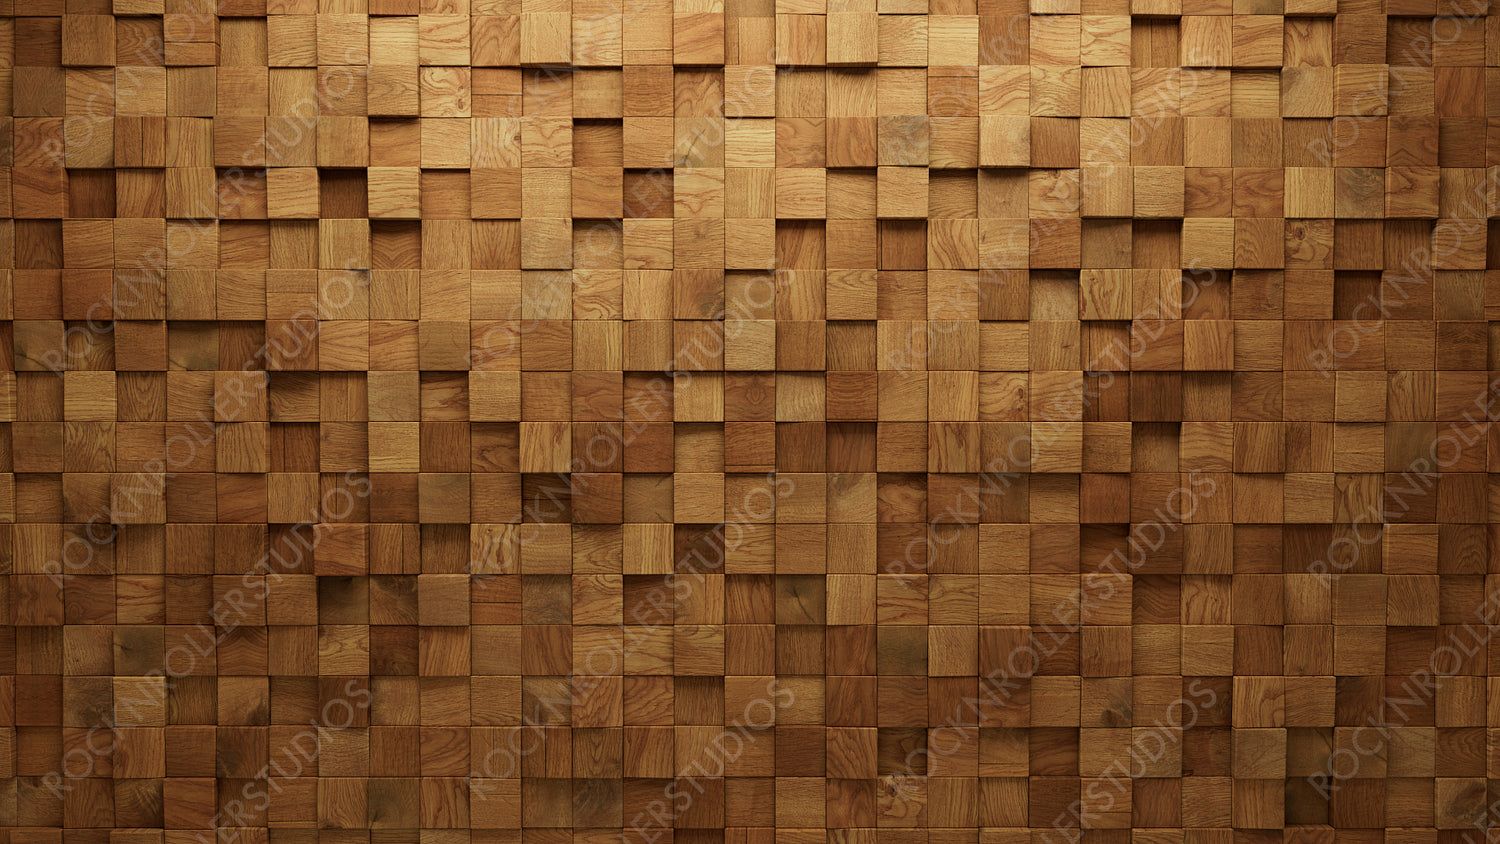 Natural, Timber Wall background with tiles. Wood, tile Wallpaper with 3D, Square blocks. 3D Render